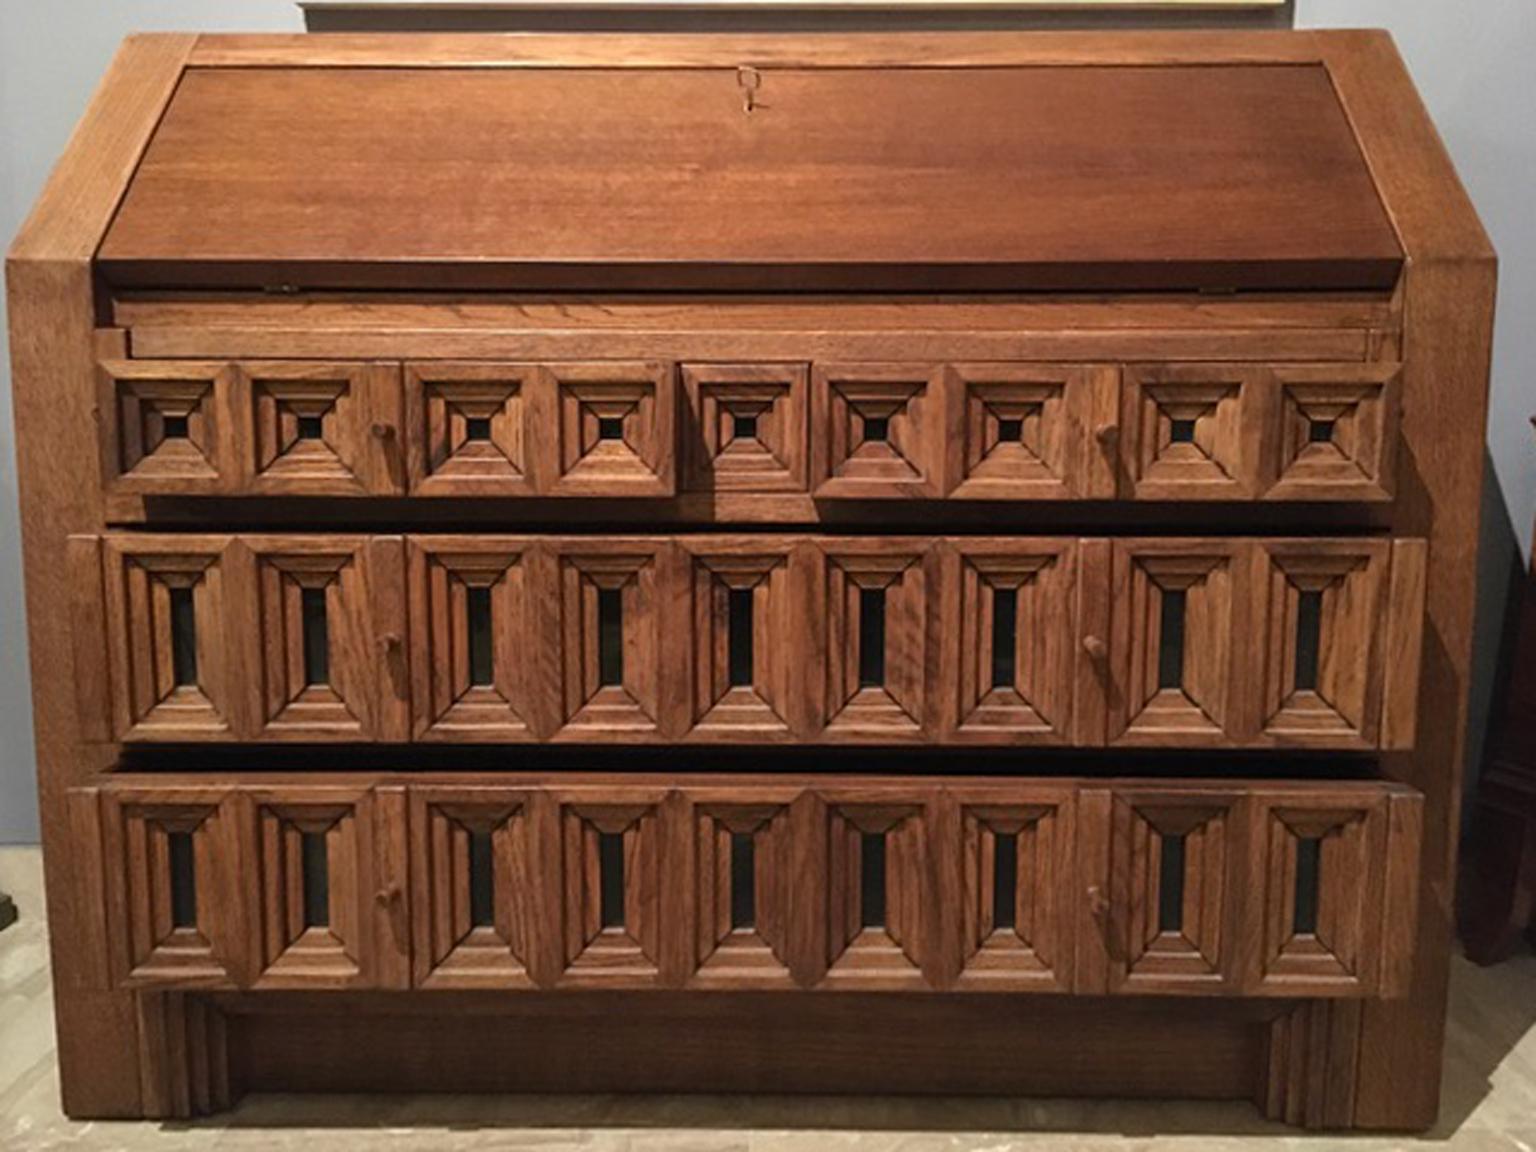 Italian 1970 Officina Rivadossi Oak Desk or Cabinet with Drawers in Brutalist Style